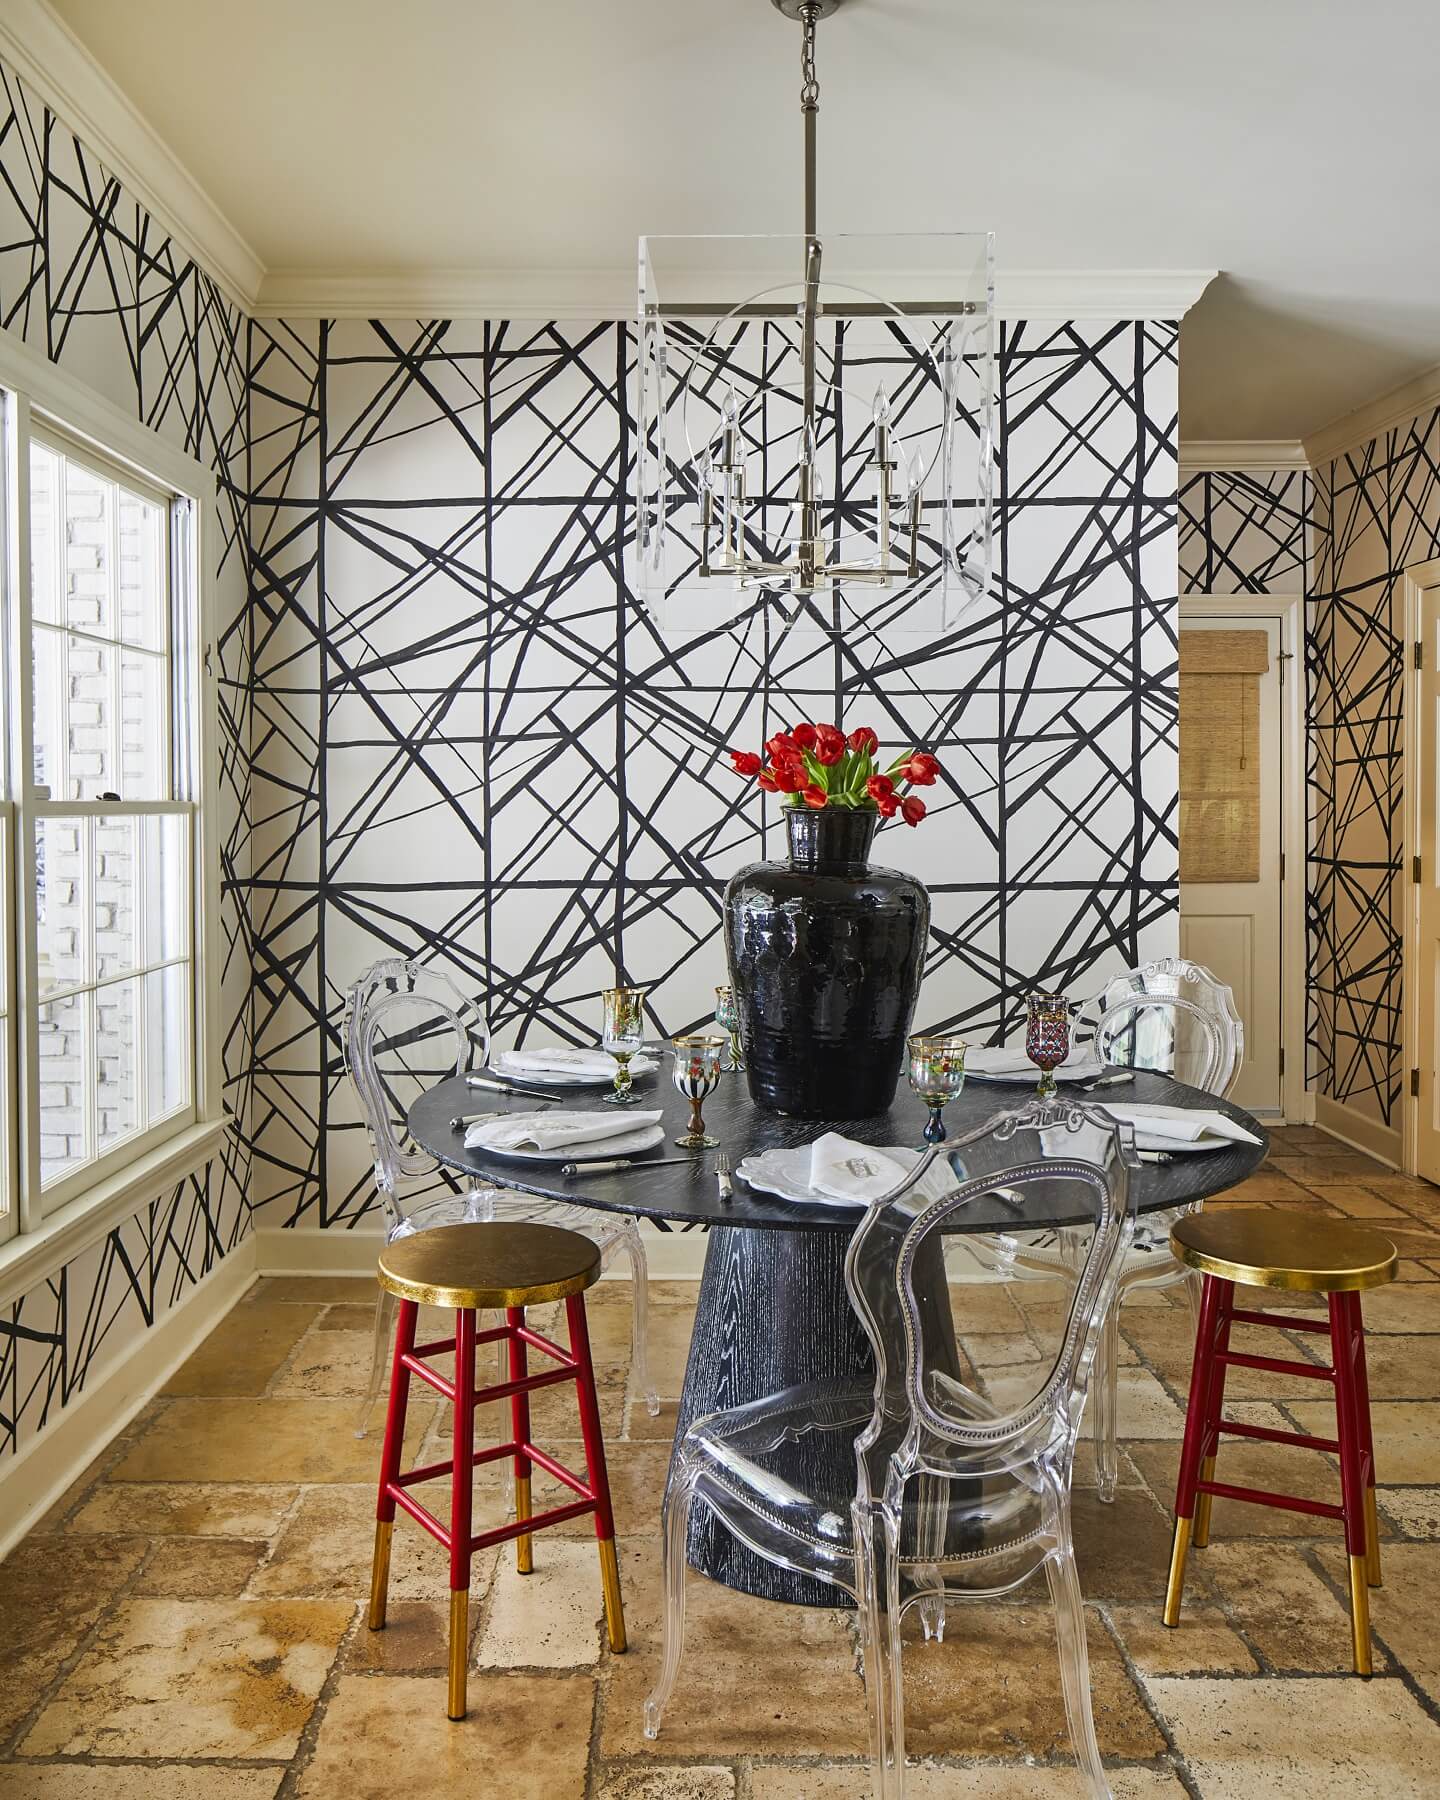 With its red gilded stools, acrylic ghost chairs, ghost chandelier, statement-making wallpaper and imposing modern table and centerpiece, this black-and-white dining nook is teeming with art-forward personality.